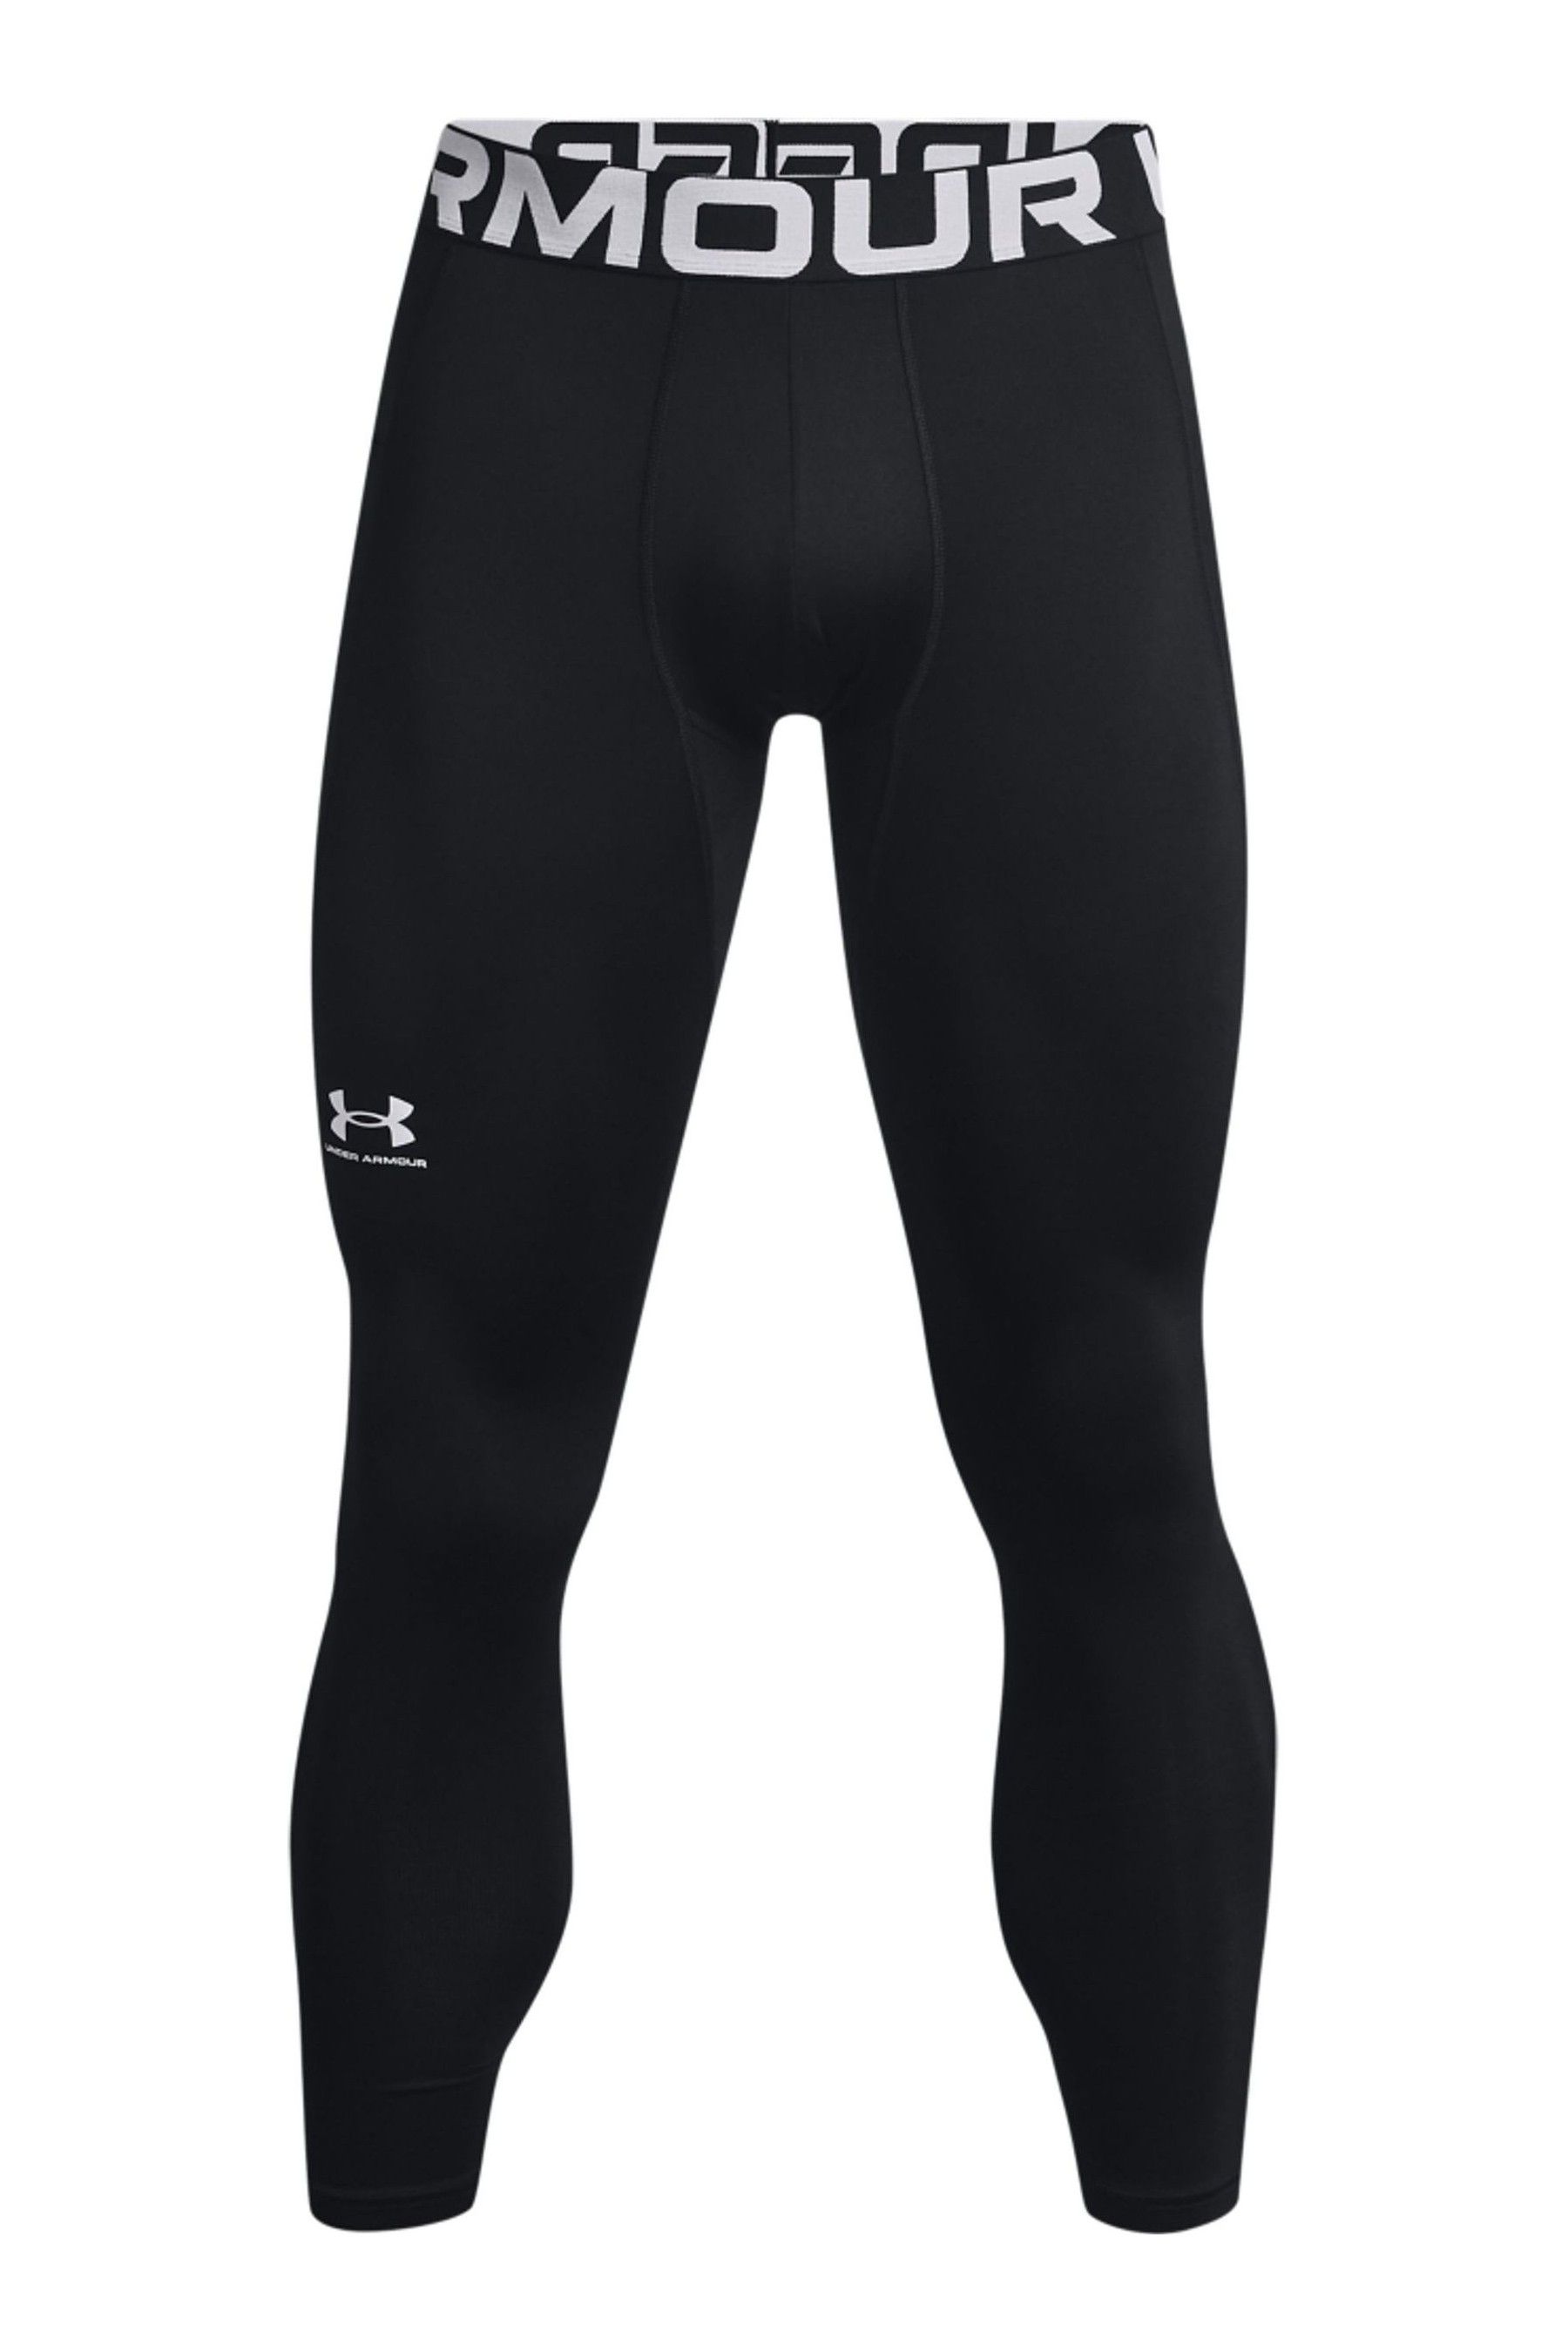 Buy Under Armour Black Mens Base Layer Leggings from the Next UK online ...